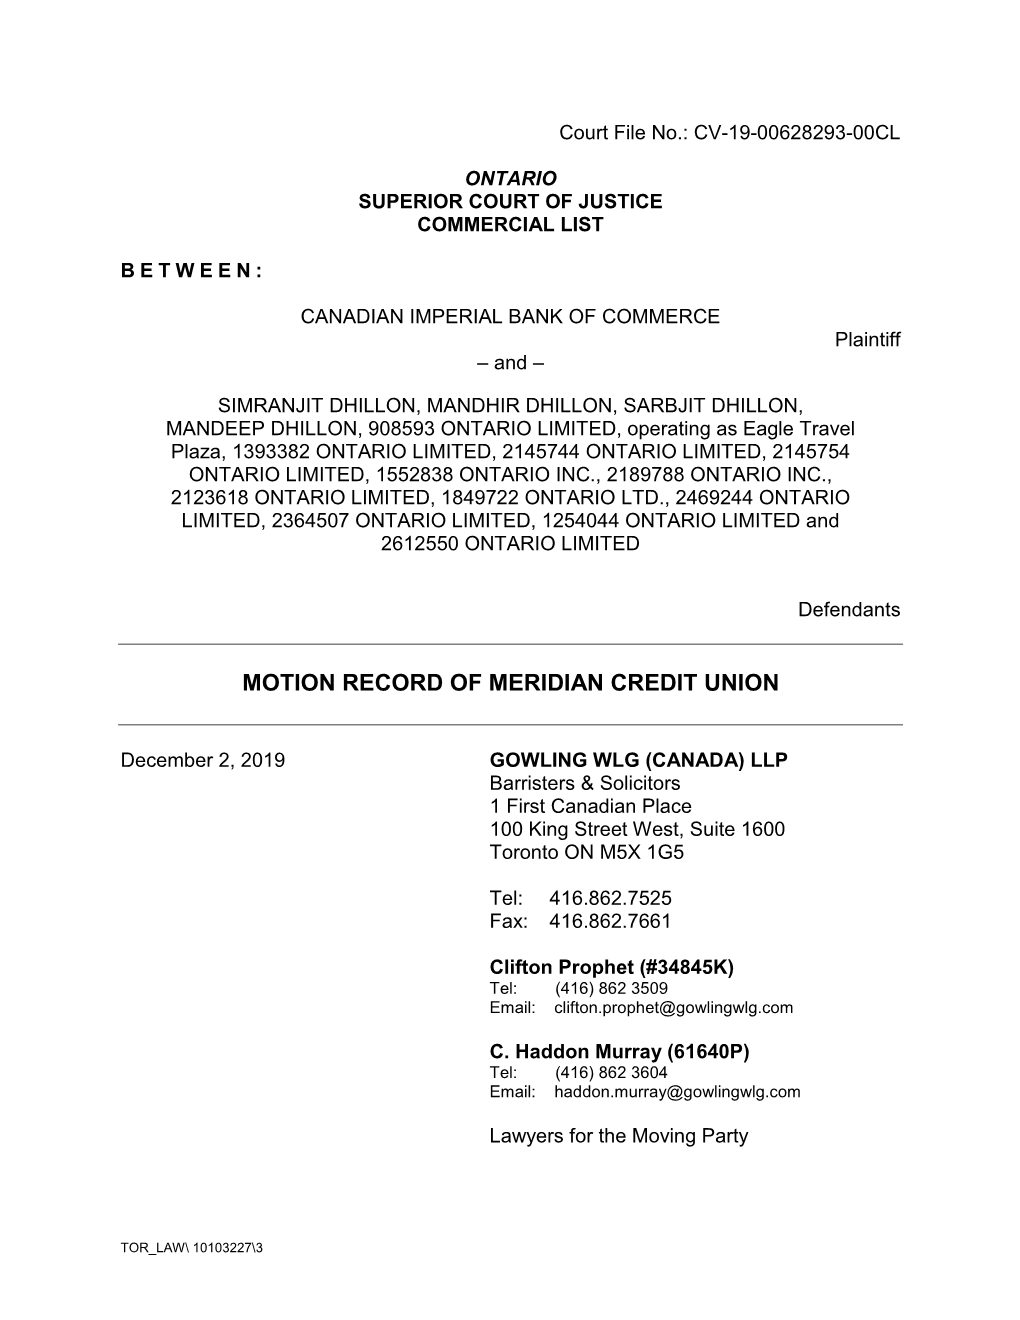 Motion Record of Meridian Credit Union